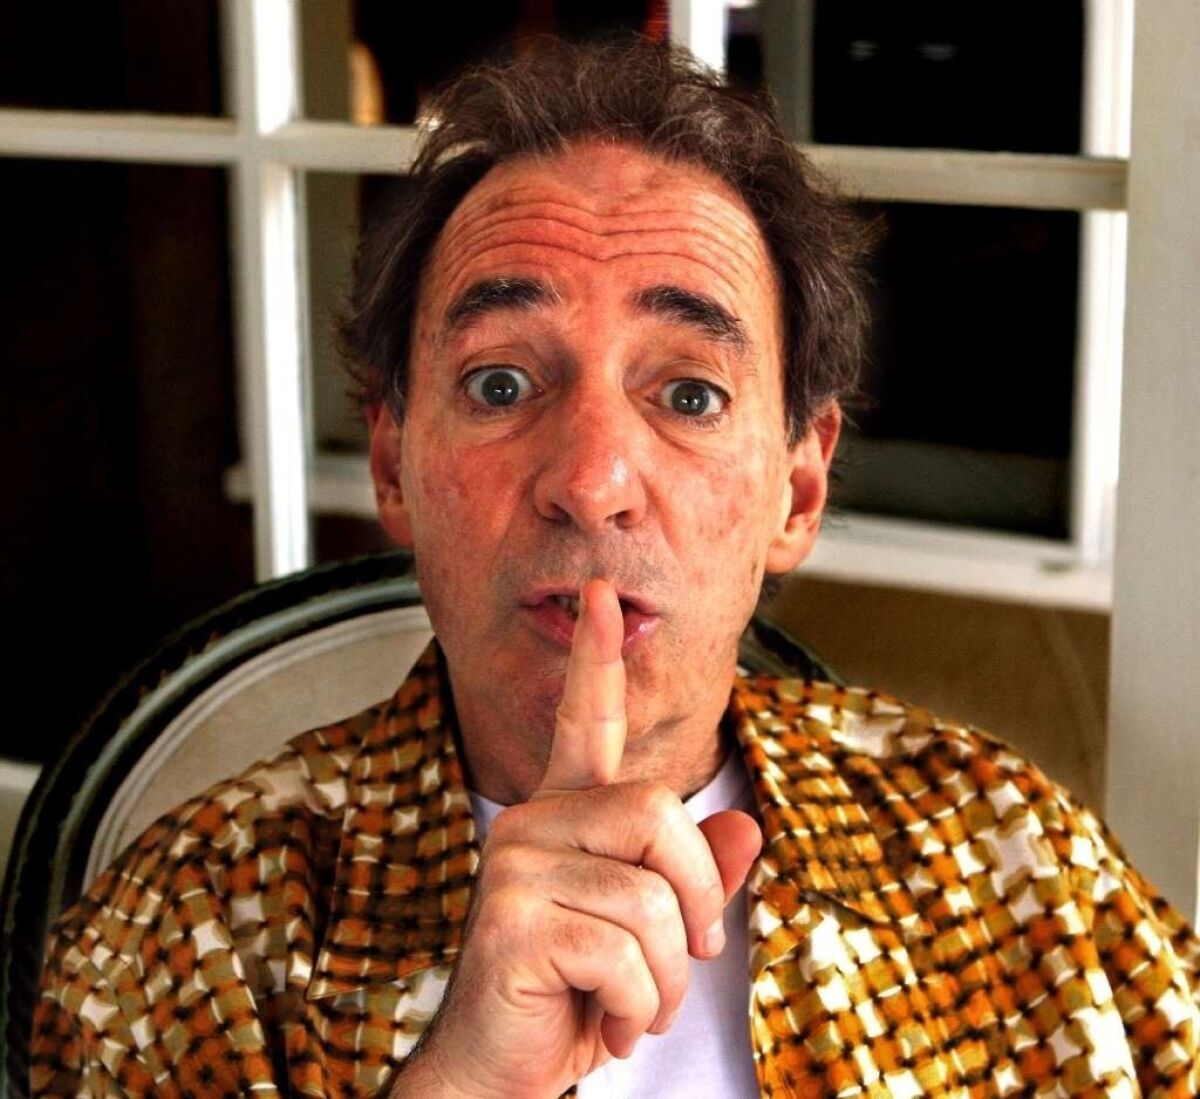 Harry Shearer's "Le Show" on KCRW-FM will live on in syndication and podcast, KCRW says.